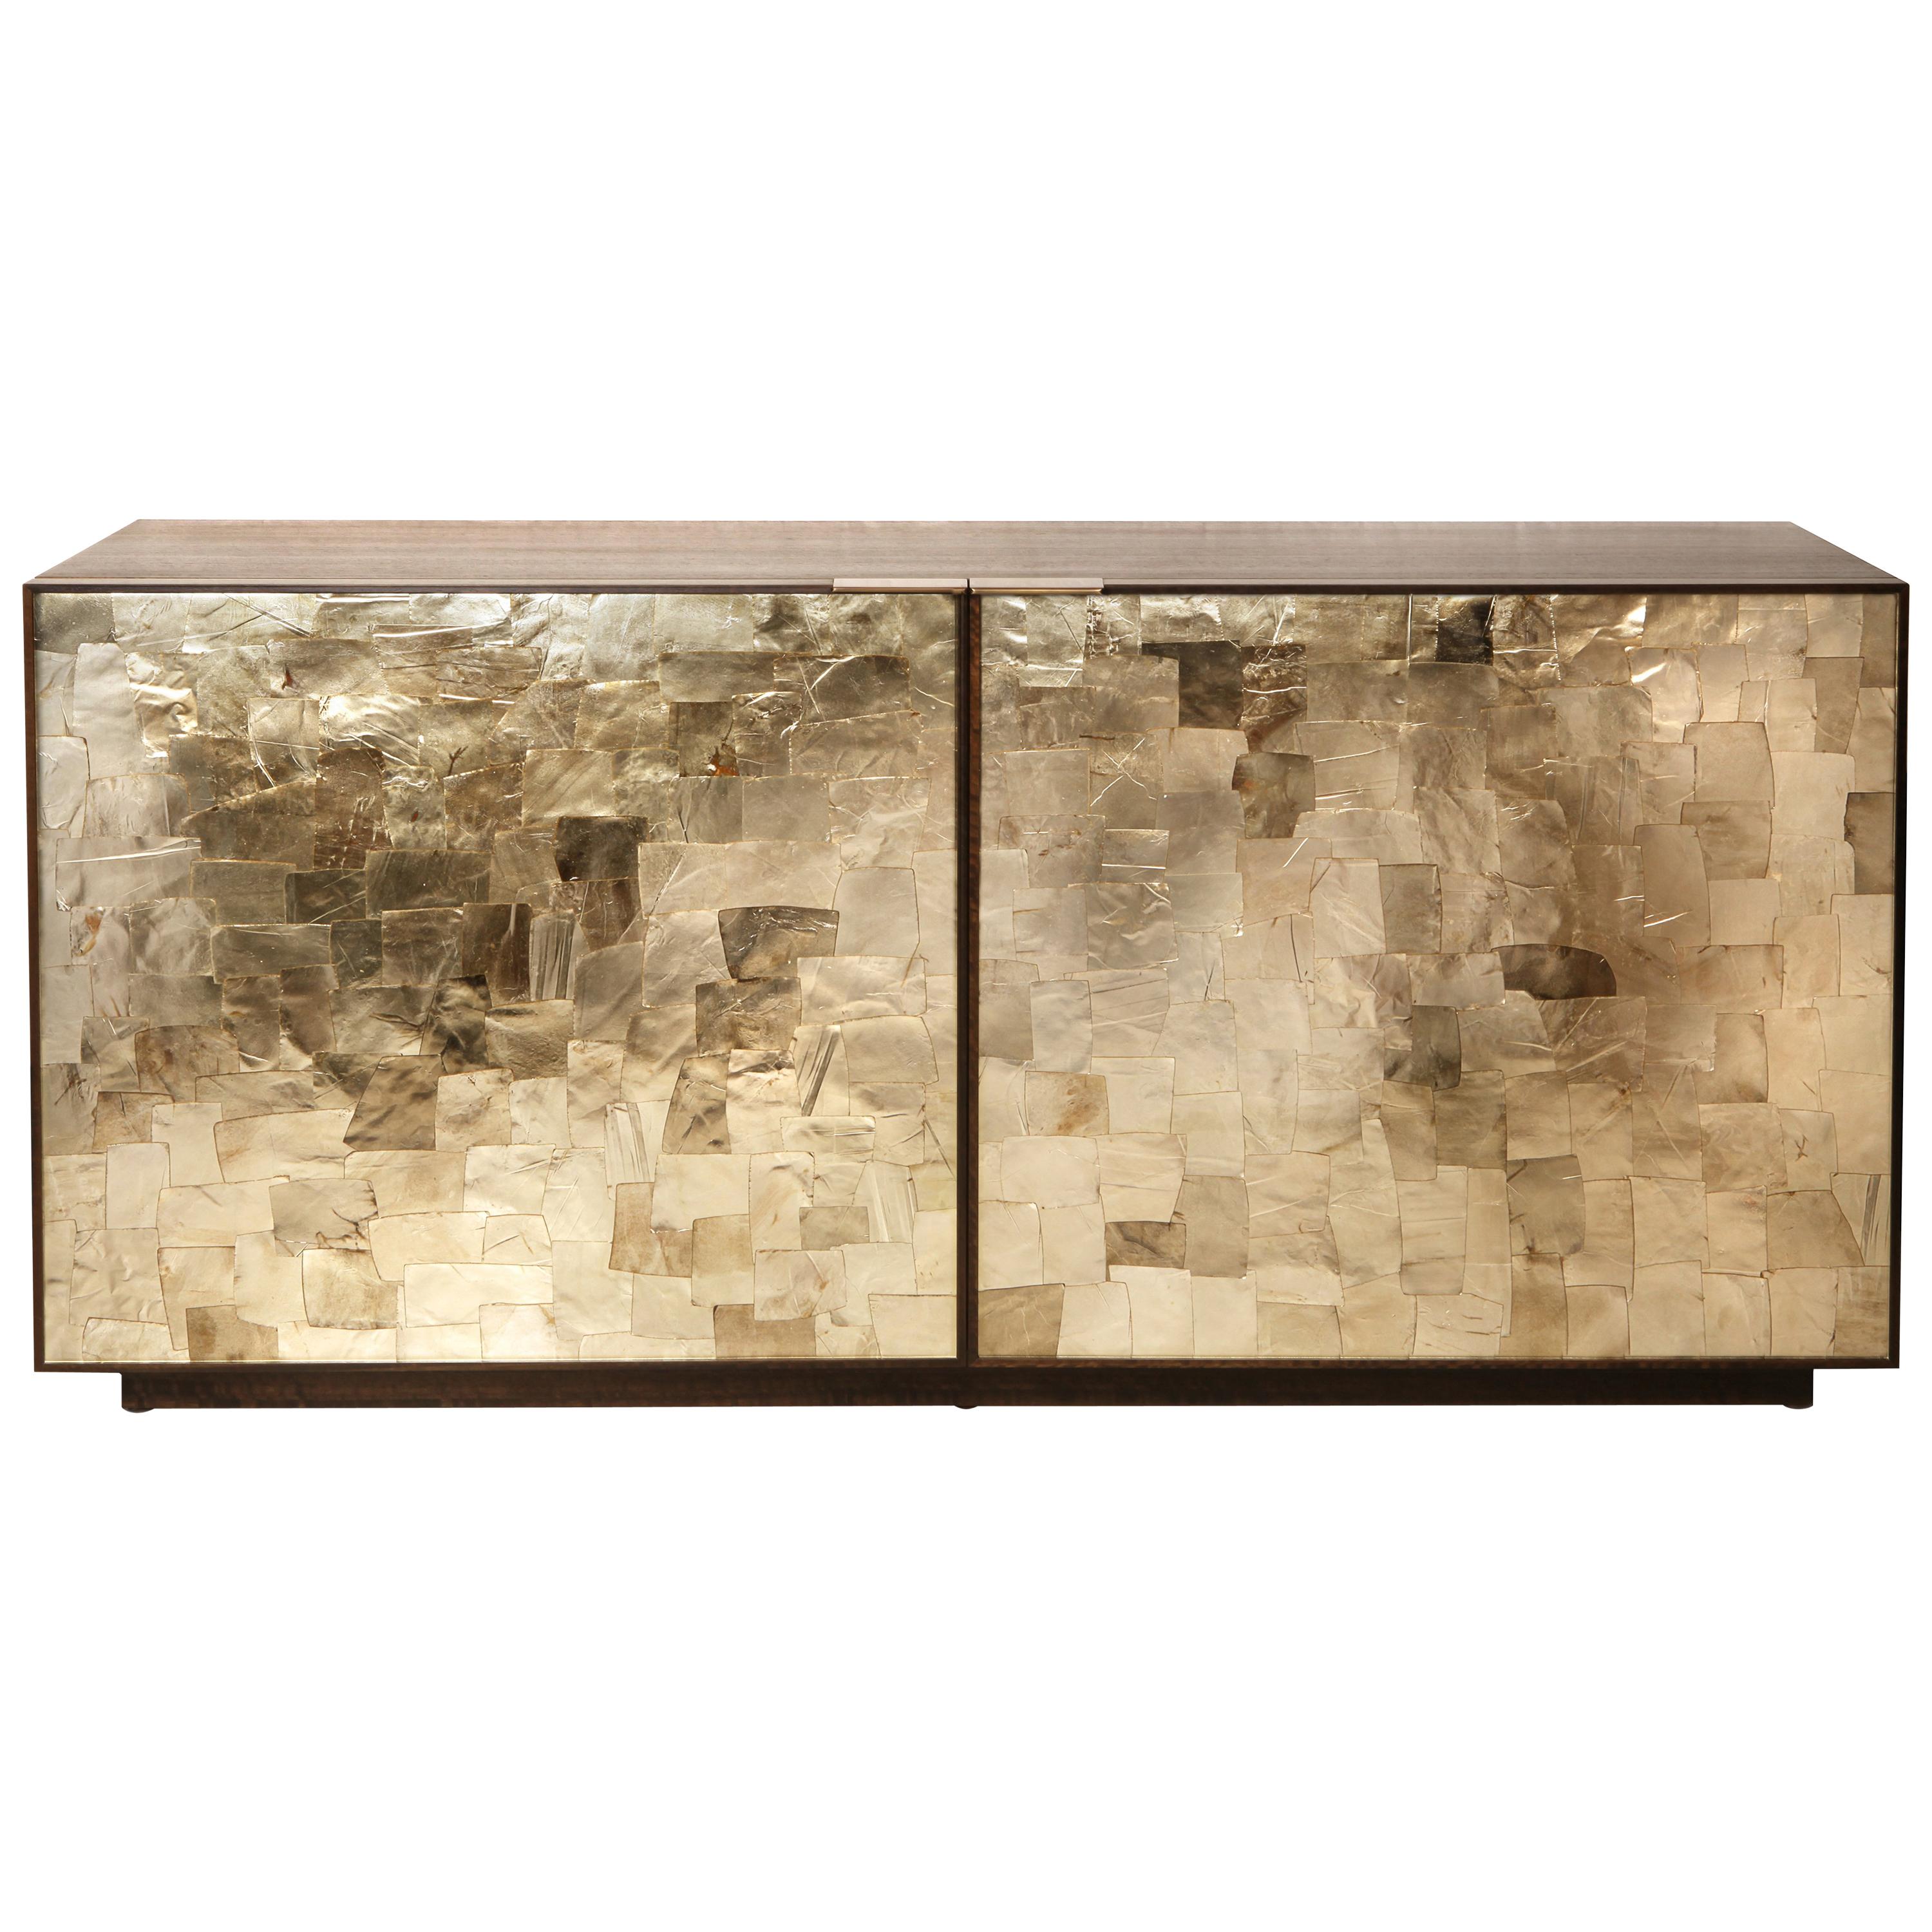 Porchester Sideboard, Smoked Eucalyptus Handcrafted Cabinet with Mica Inlay For Sale